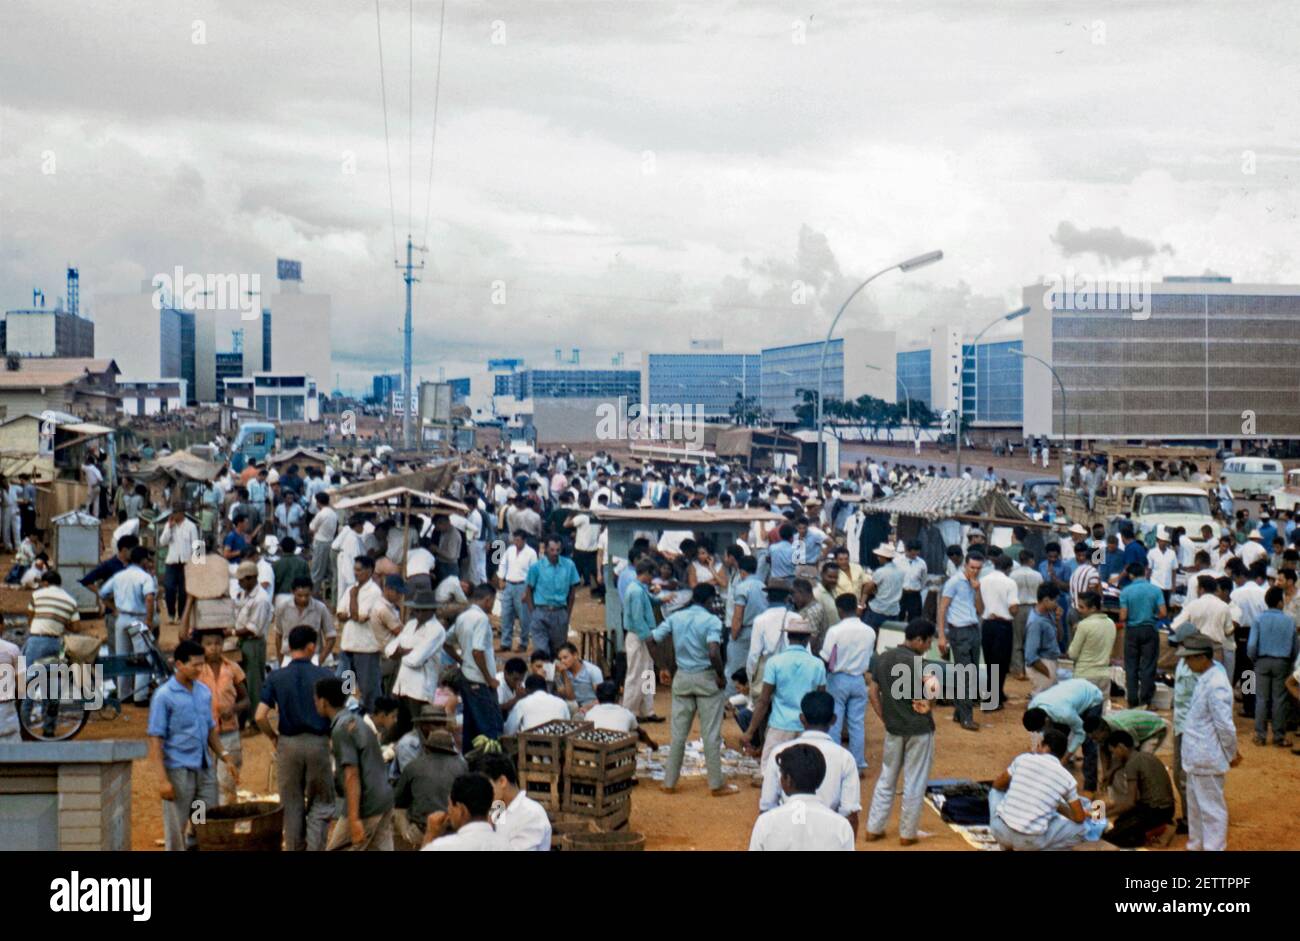 Old meets new – a traditional, busy Sunday street market in the modern setting of Brasília, Brazil 1961. The dull conditions haven’t put off the crowds, very much male dominated. The architecture of the unfinished modern city is seen in the background. Brasília is the federal capital of Brazil. The city is located in the Brazilian highlands in the country's centre-west region. Brasília was a planned city developed by Lúcio Costa, Oscar Niemeyer and Joaquim Cardozo in 1956. This image is from an old amateur 35mm colour transparency. Stock Photo